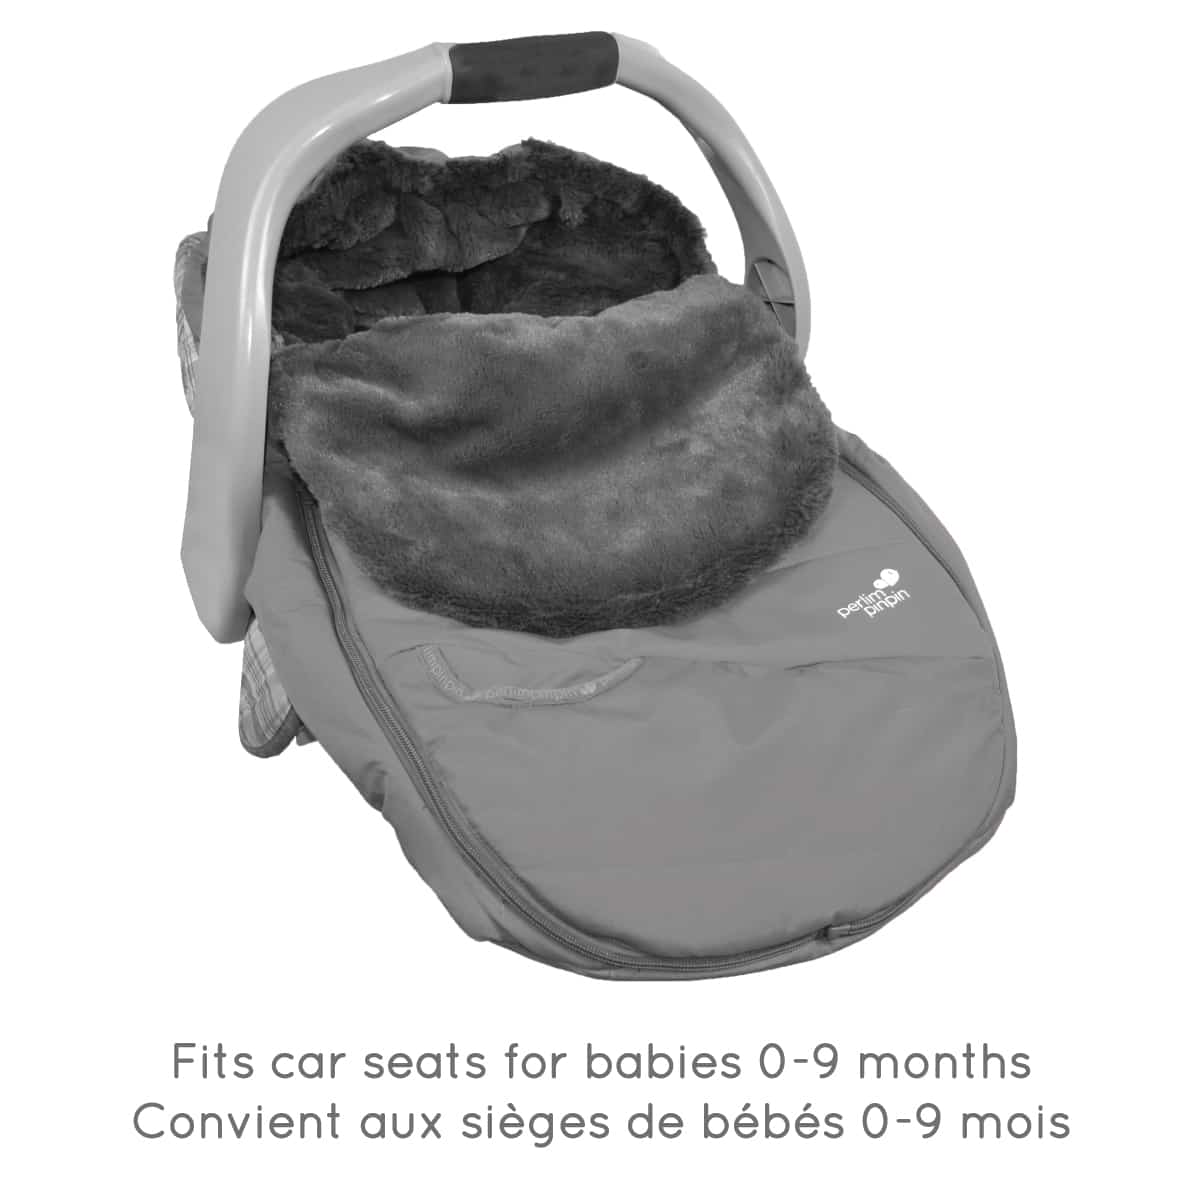 Baby car seat cover for winter - Nebula textured